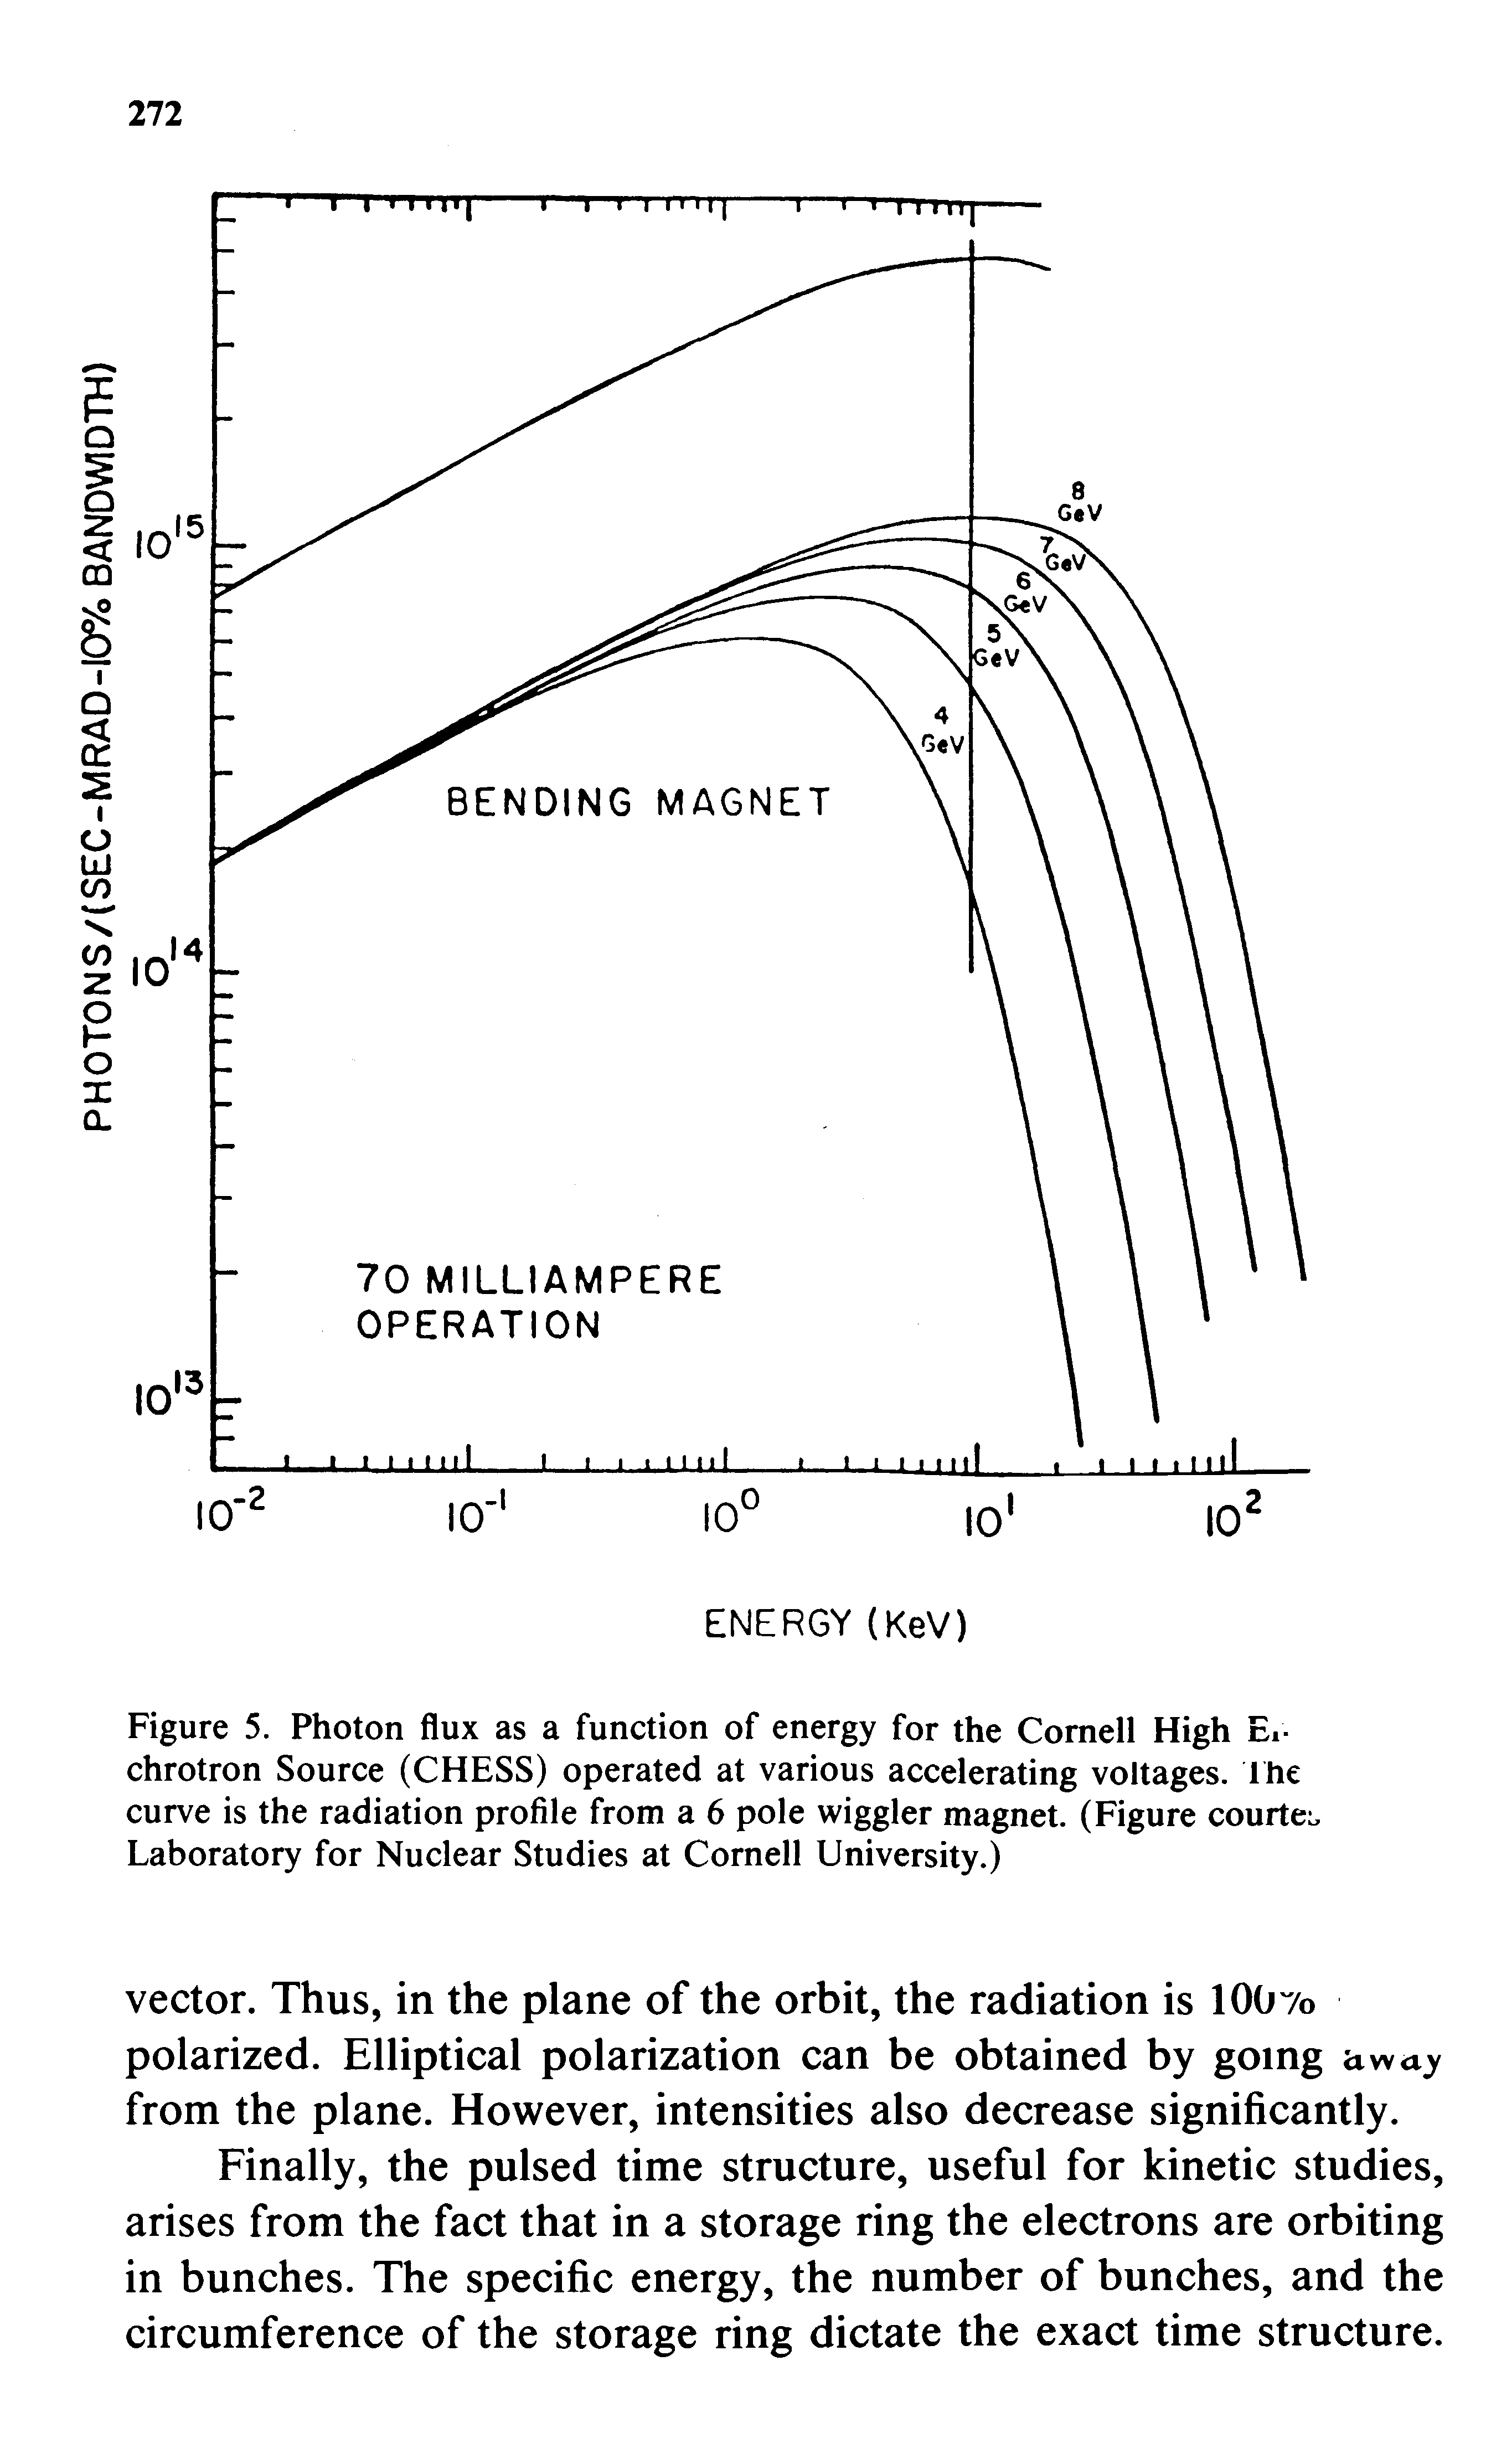 Figure 5. Photon flux as a function of energy for the Cornell High Ei-chrotron Source (CHESS) operated at various accelerating voltages. The curve is the radiation profile from a 6 pole wiggler magnet. (Figure courted Laboratory for Nuclear Studies at Cornell University.)...